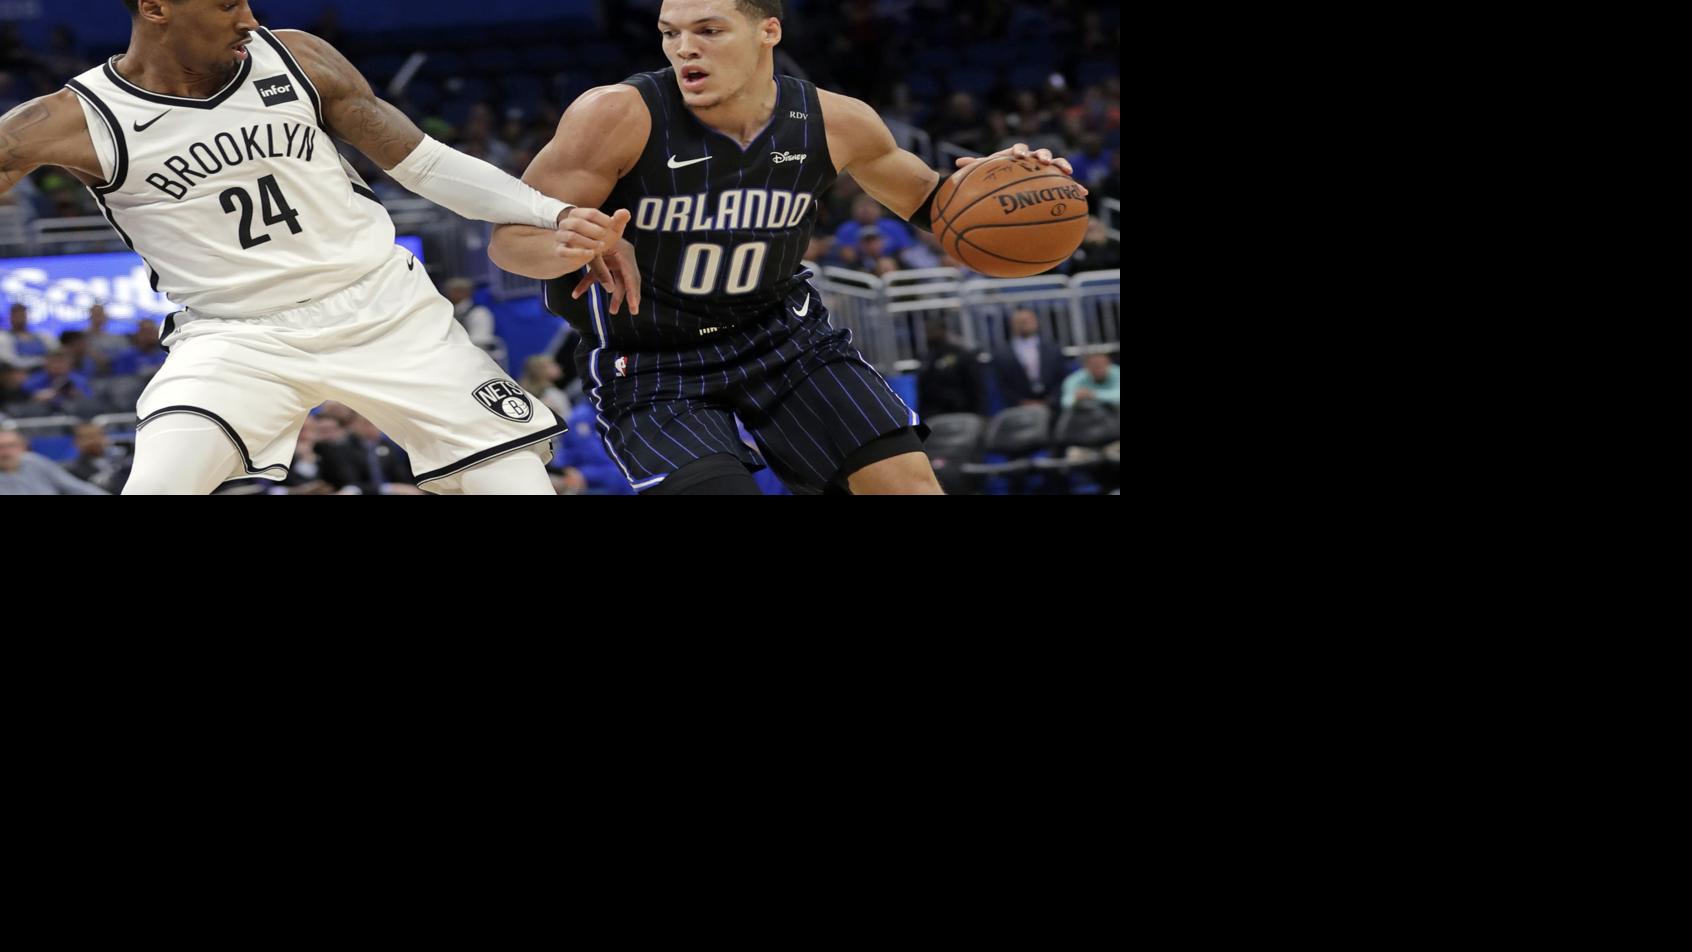 Aaron Gordon can defend the spot, but is he really a small forward